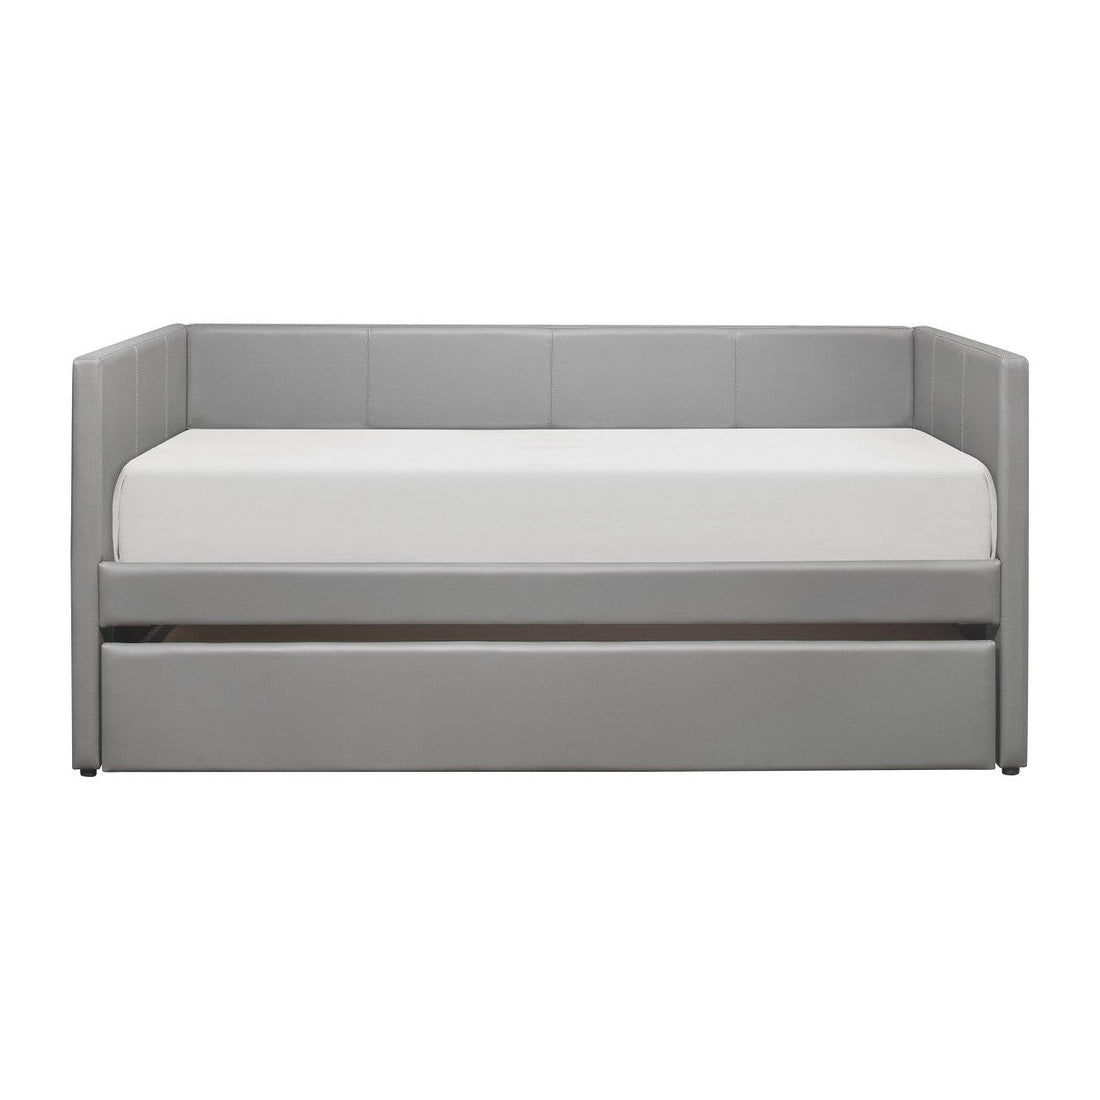 (2) Daybed With Trundle 4949GY*